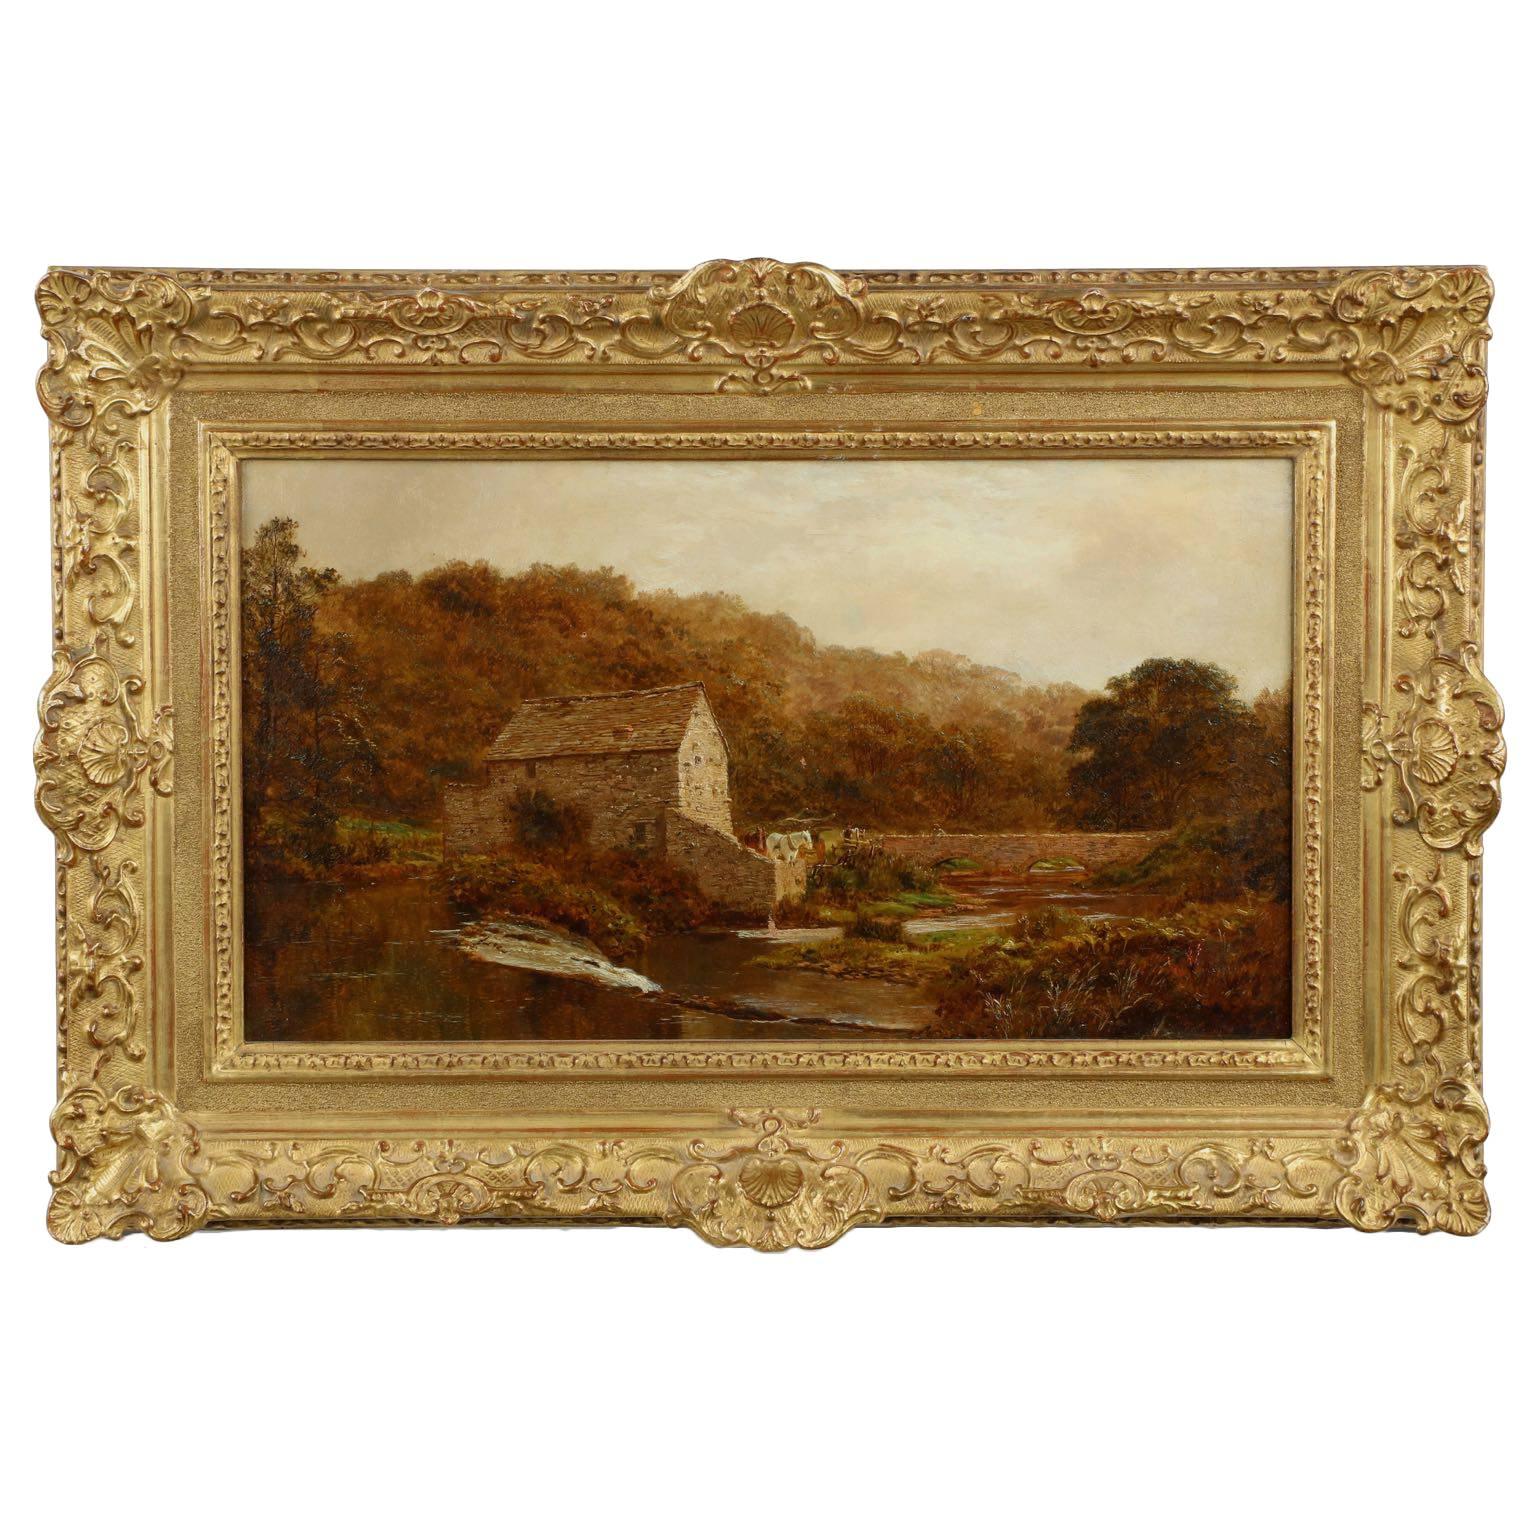  "The Sawmill" by Robert Gallon, Oil Landscape Painting c. 1884